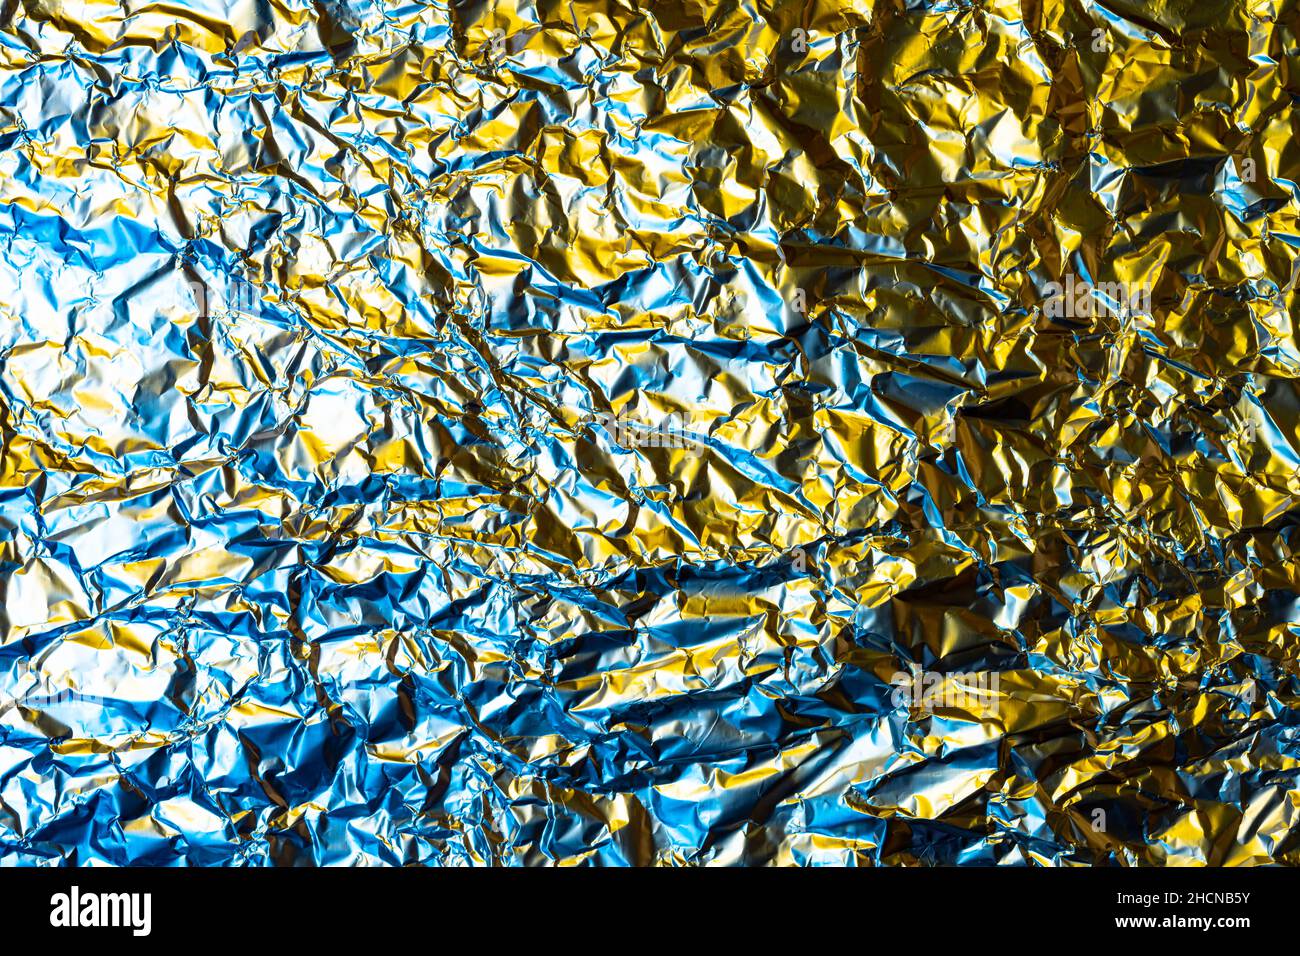 crumpled foil background illuminated with colored lights Stock Photo